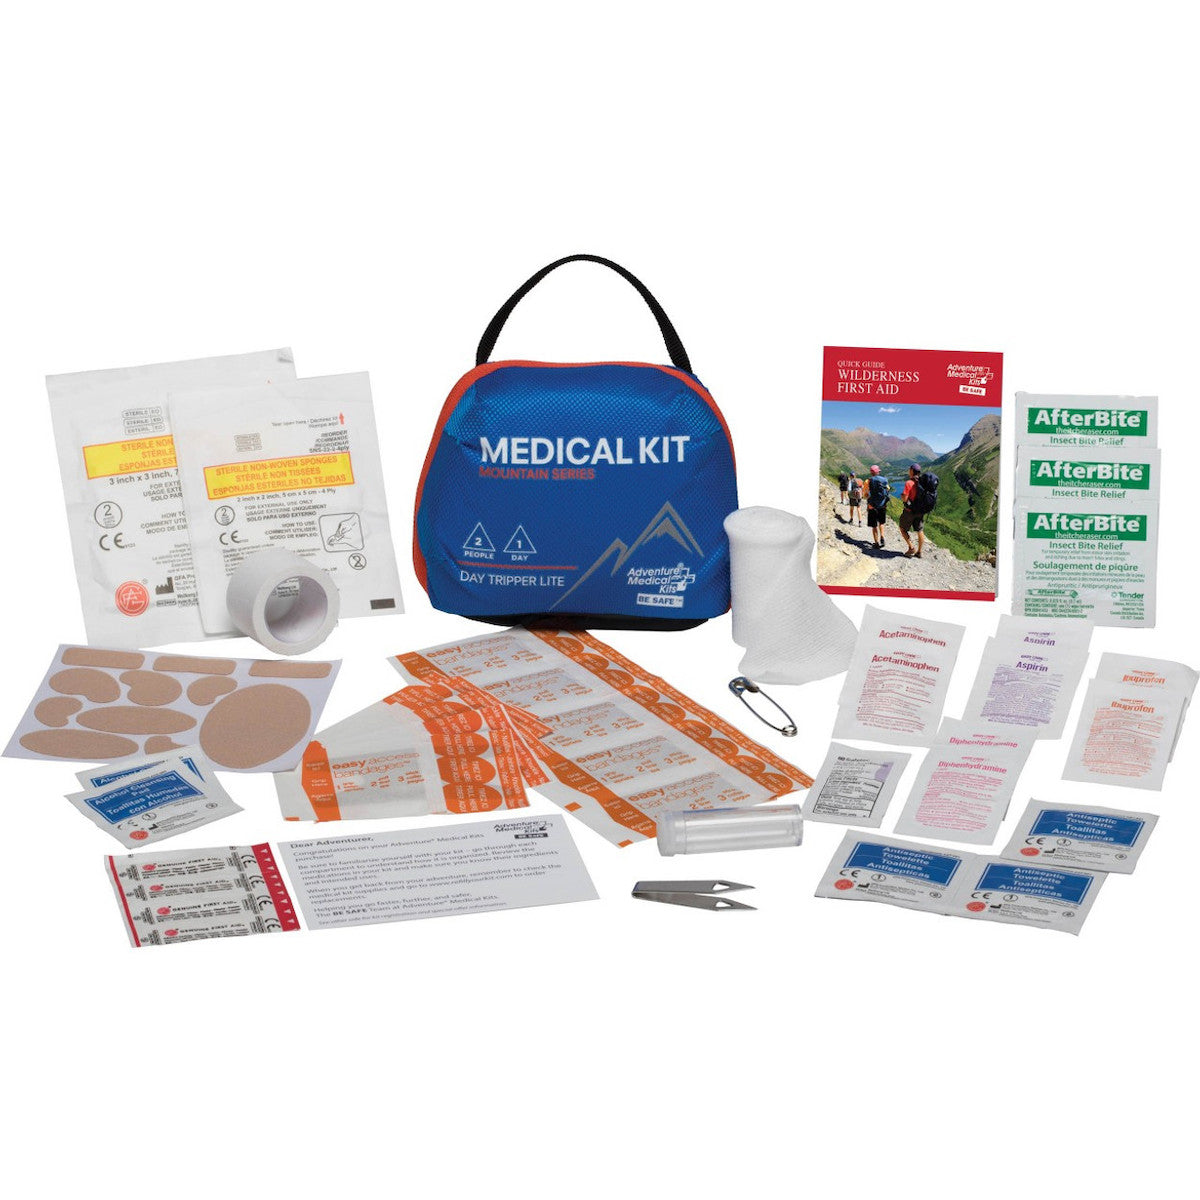 Adventure Medical First Aid Kit Mountain Series - Day Tripper Lite